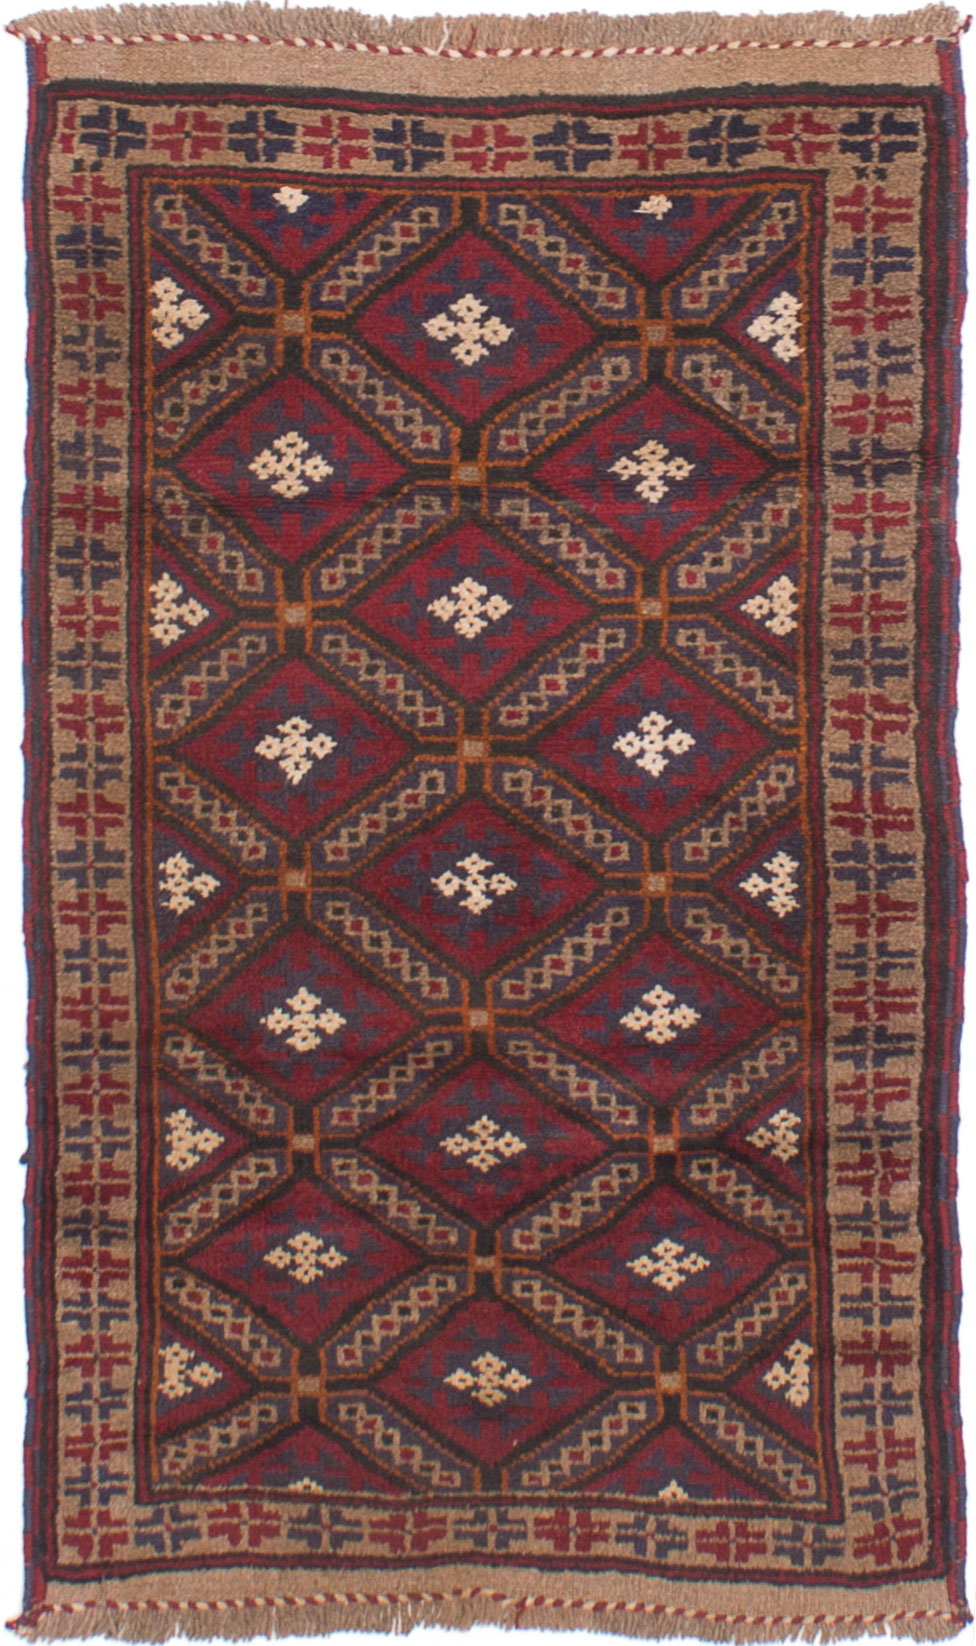 Hand-knotted Finest Rizbaft Dark Red Wool Rug 2'10" x 4'9" Size: 2'10" x 4'9"  